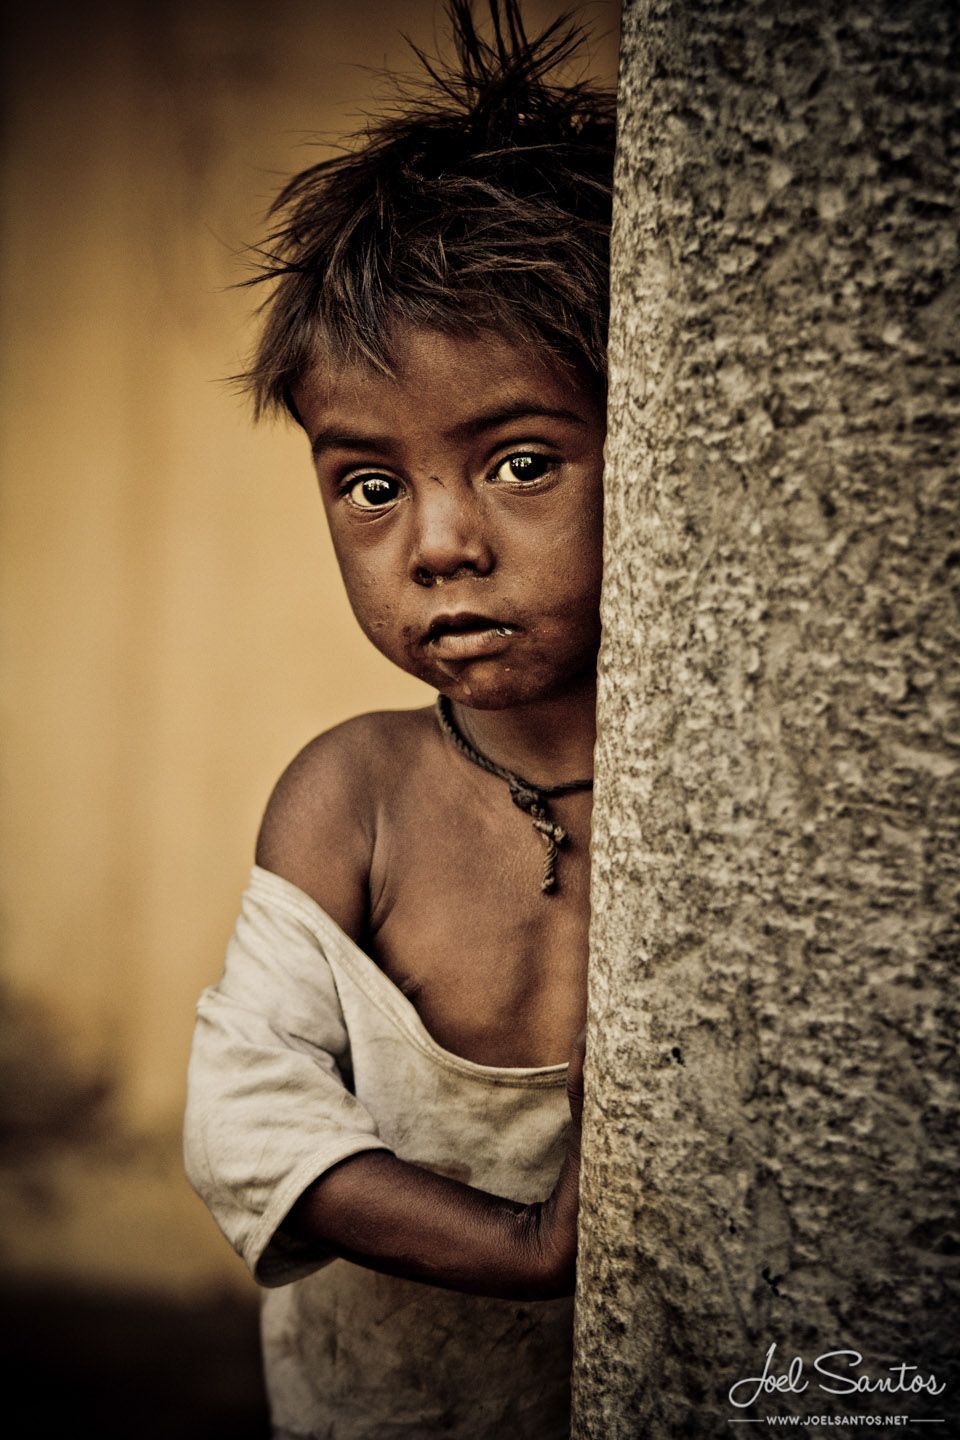 Boy – India. This child is “perfection” too, but is in a terrible sad place.  Lord, please help.  ak